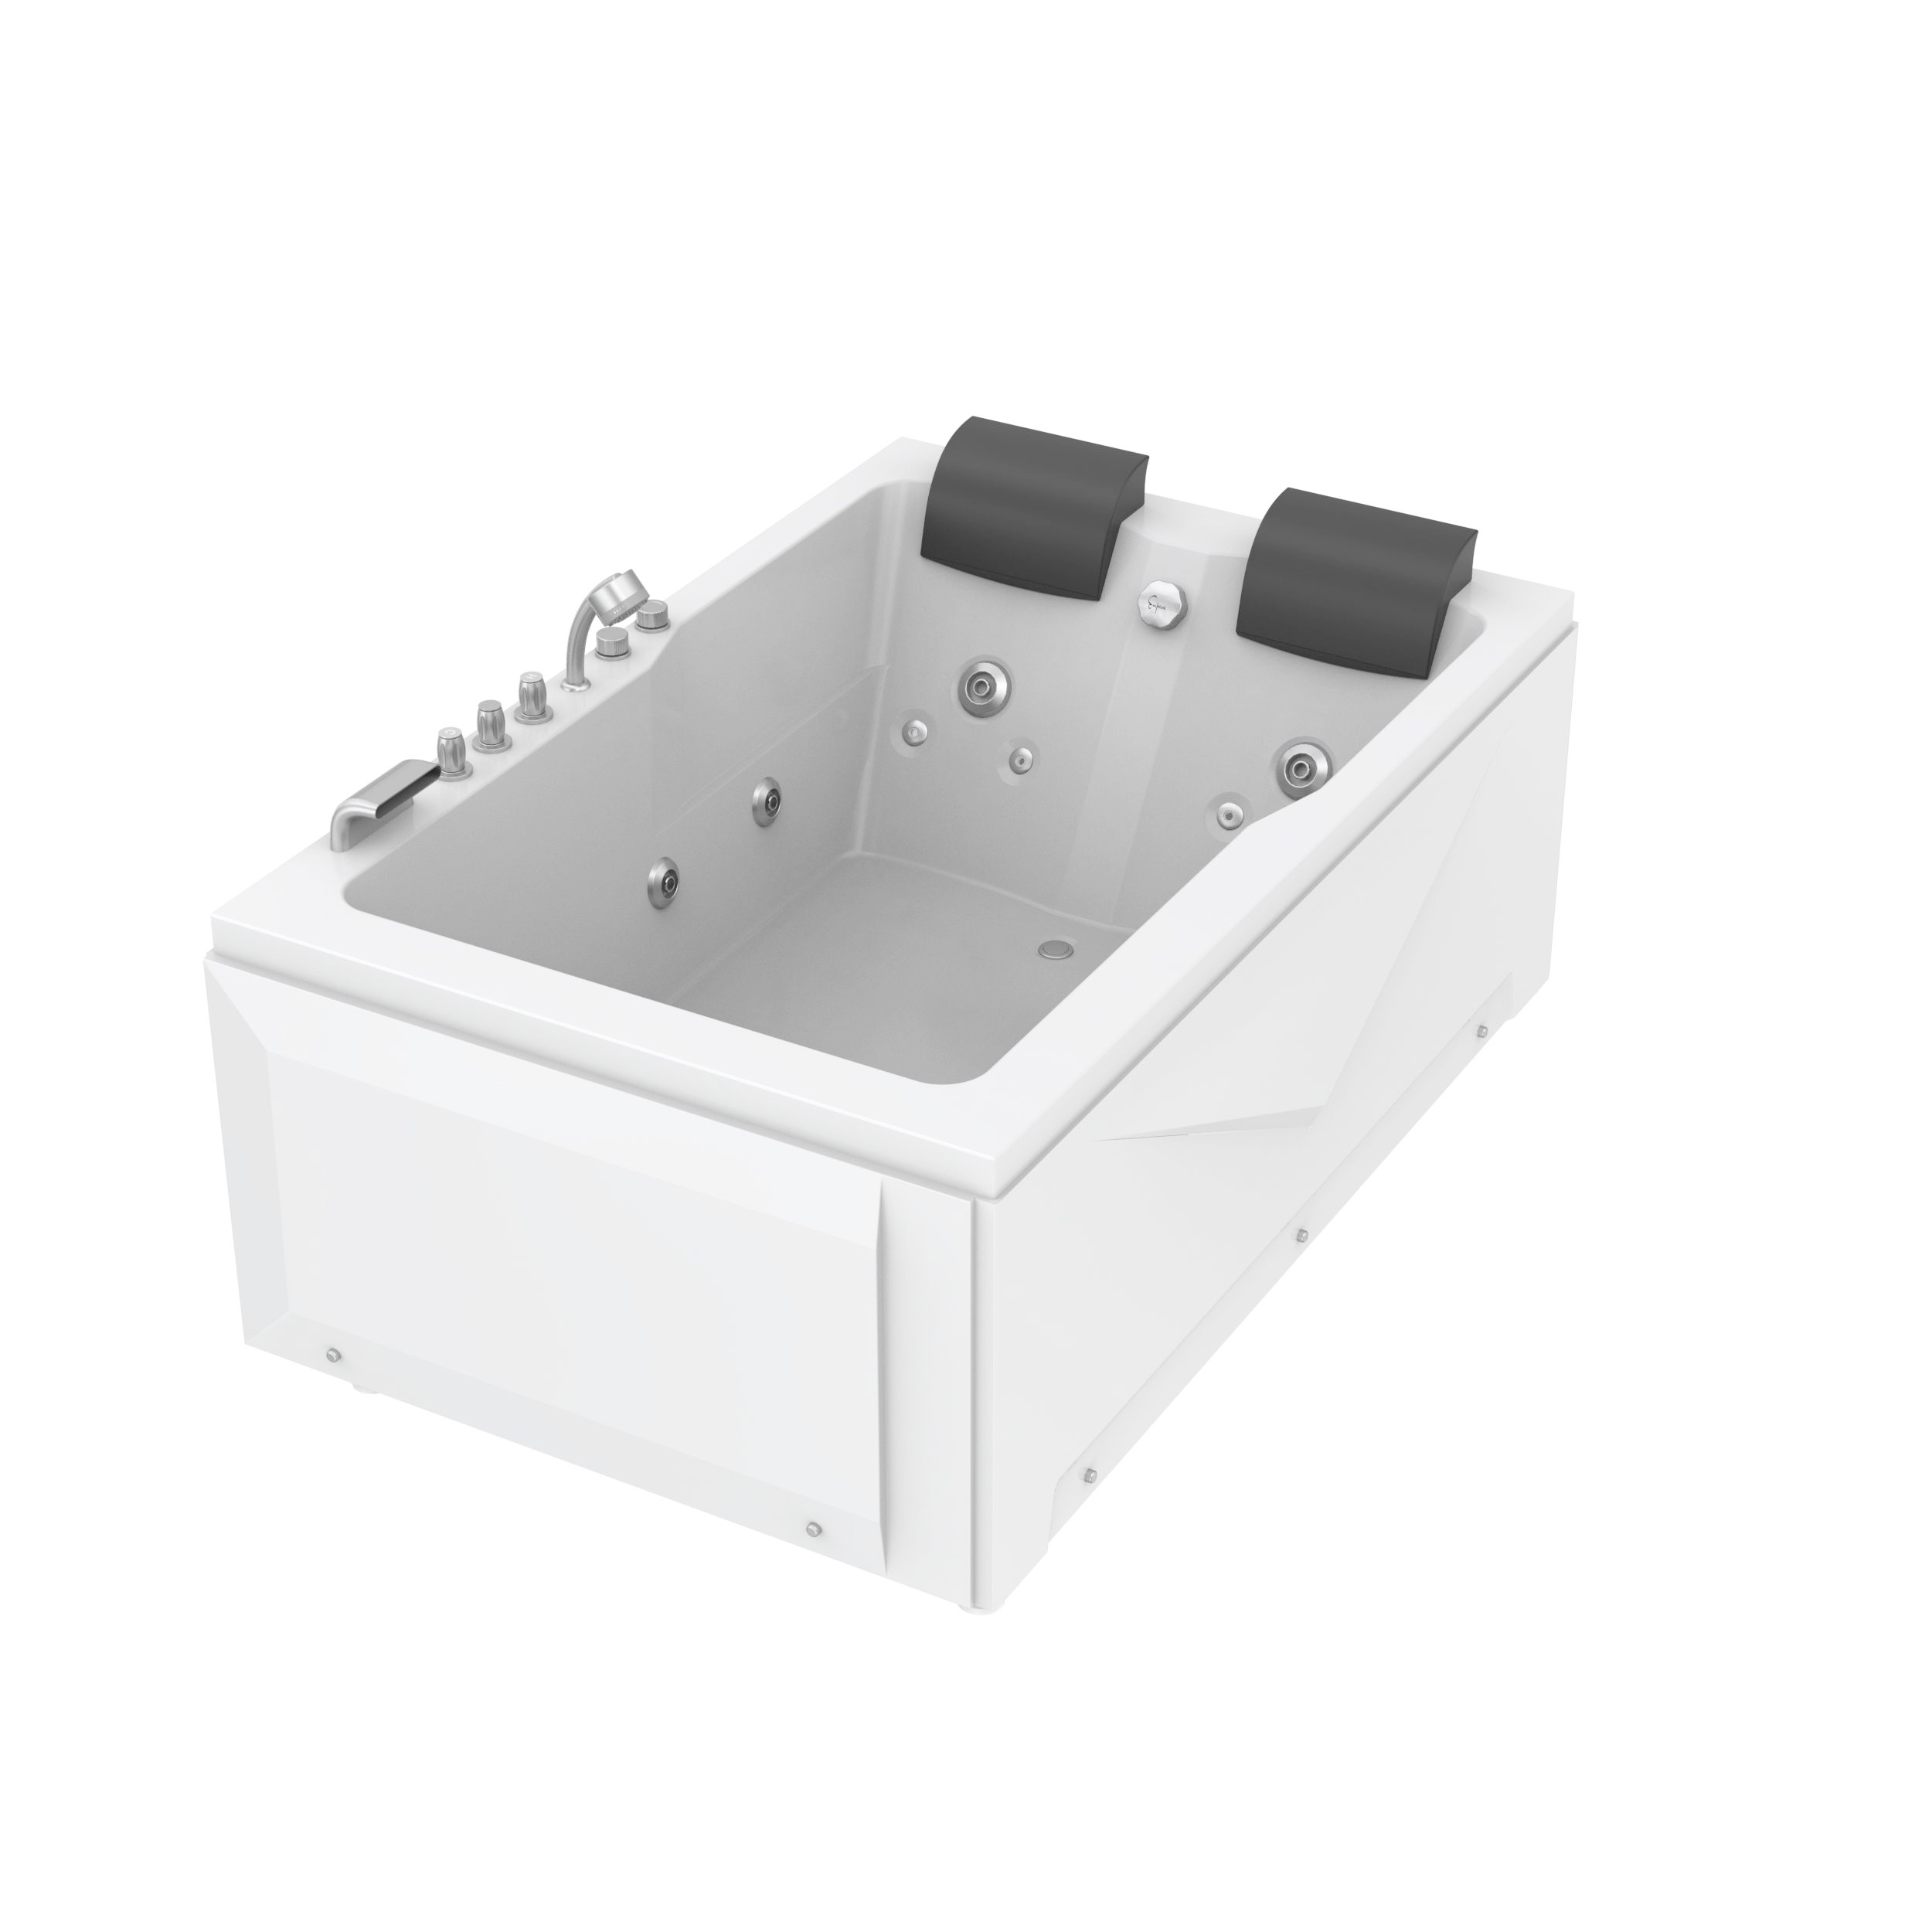 Empava 71 in. Acrylic Right Drain Rectangular Alcove Whirlpool Bathtub in  White with 16 Water Jets EMPV-71JT667B - The Home Depot